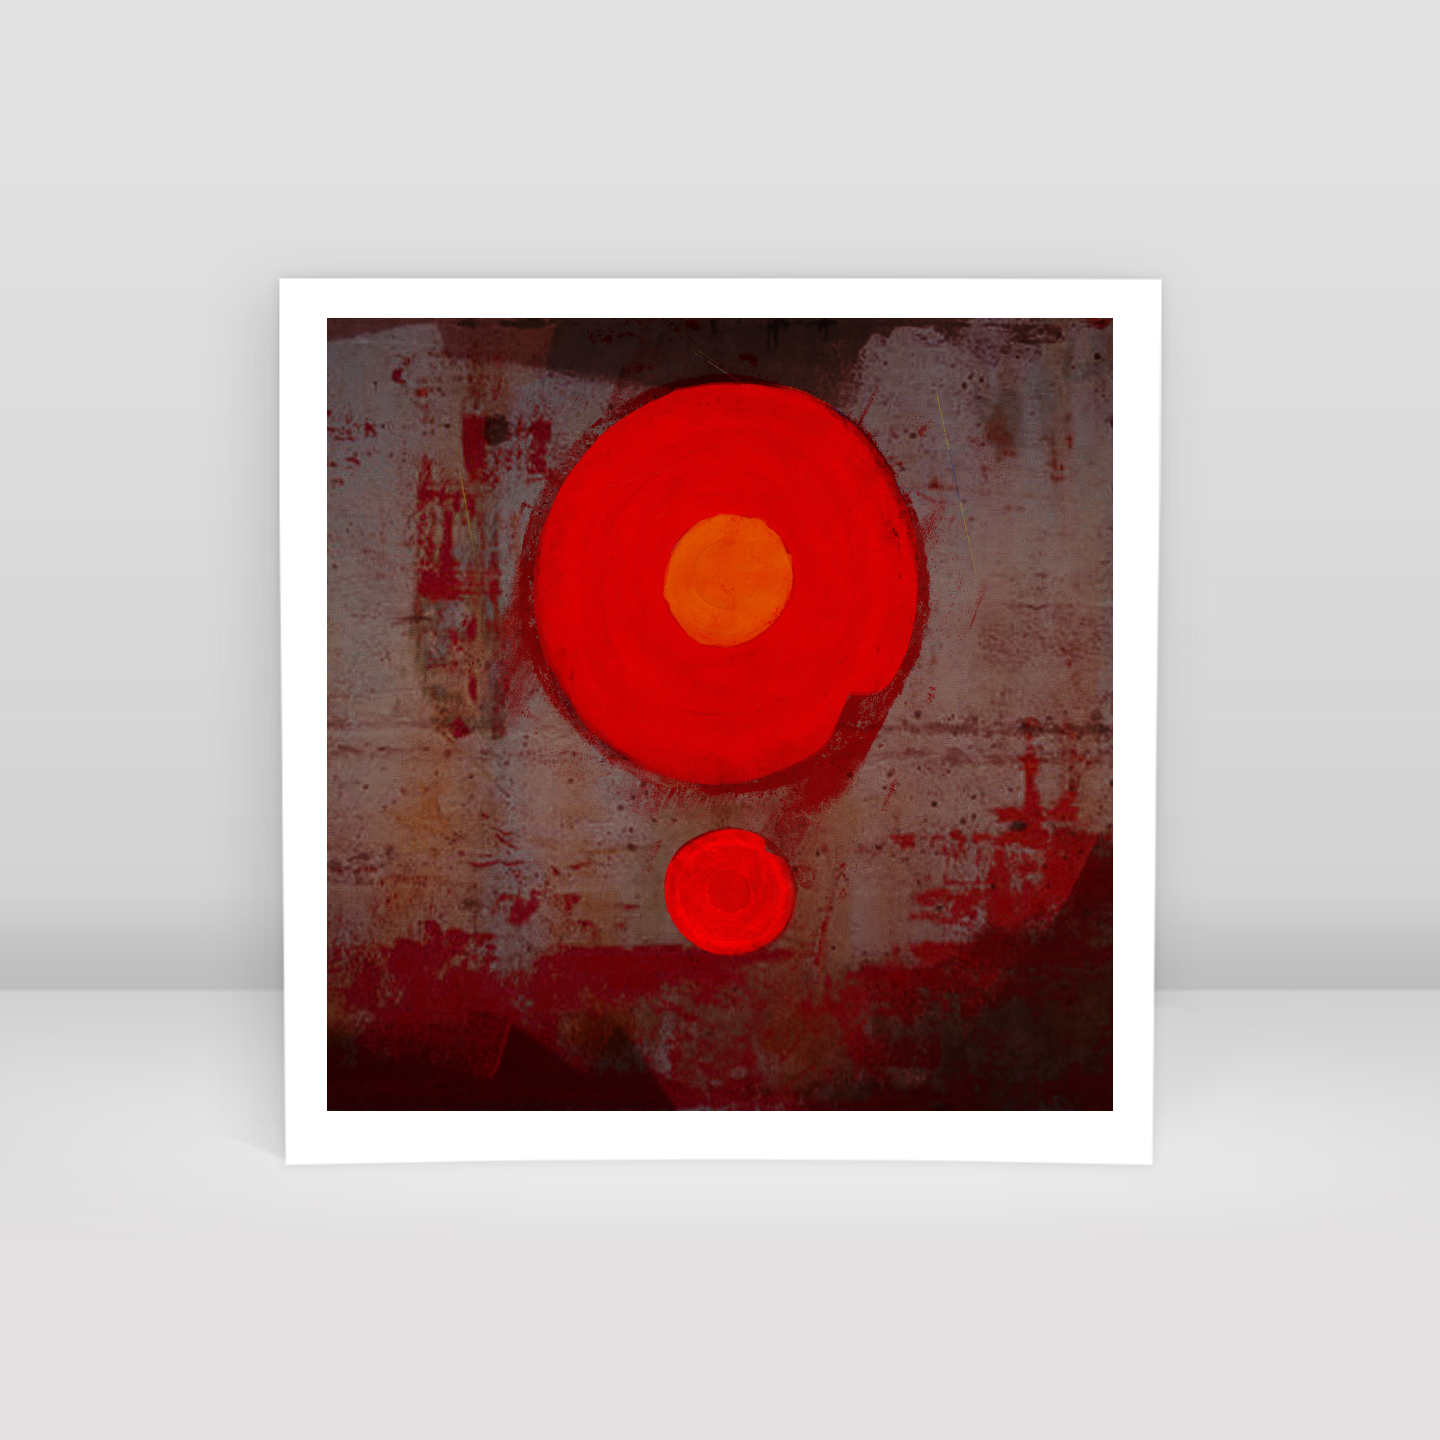 Big Red Dot and Her Little Red Dotie 05 - Art Print